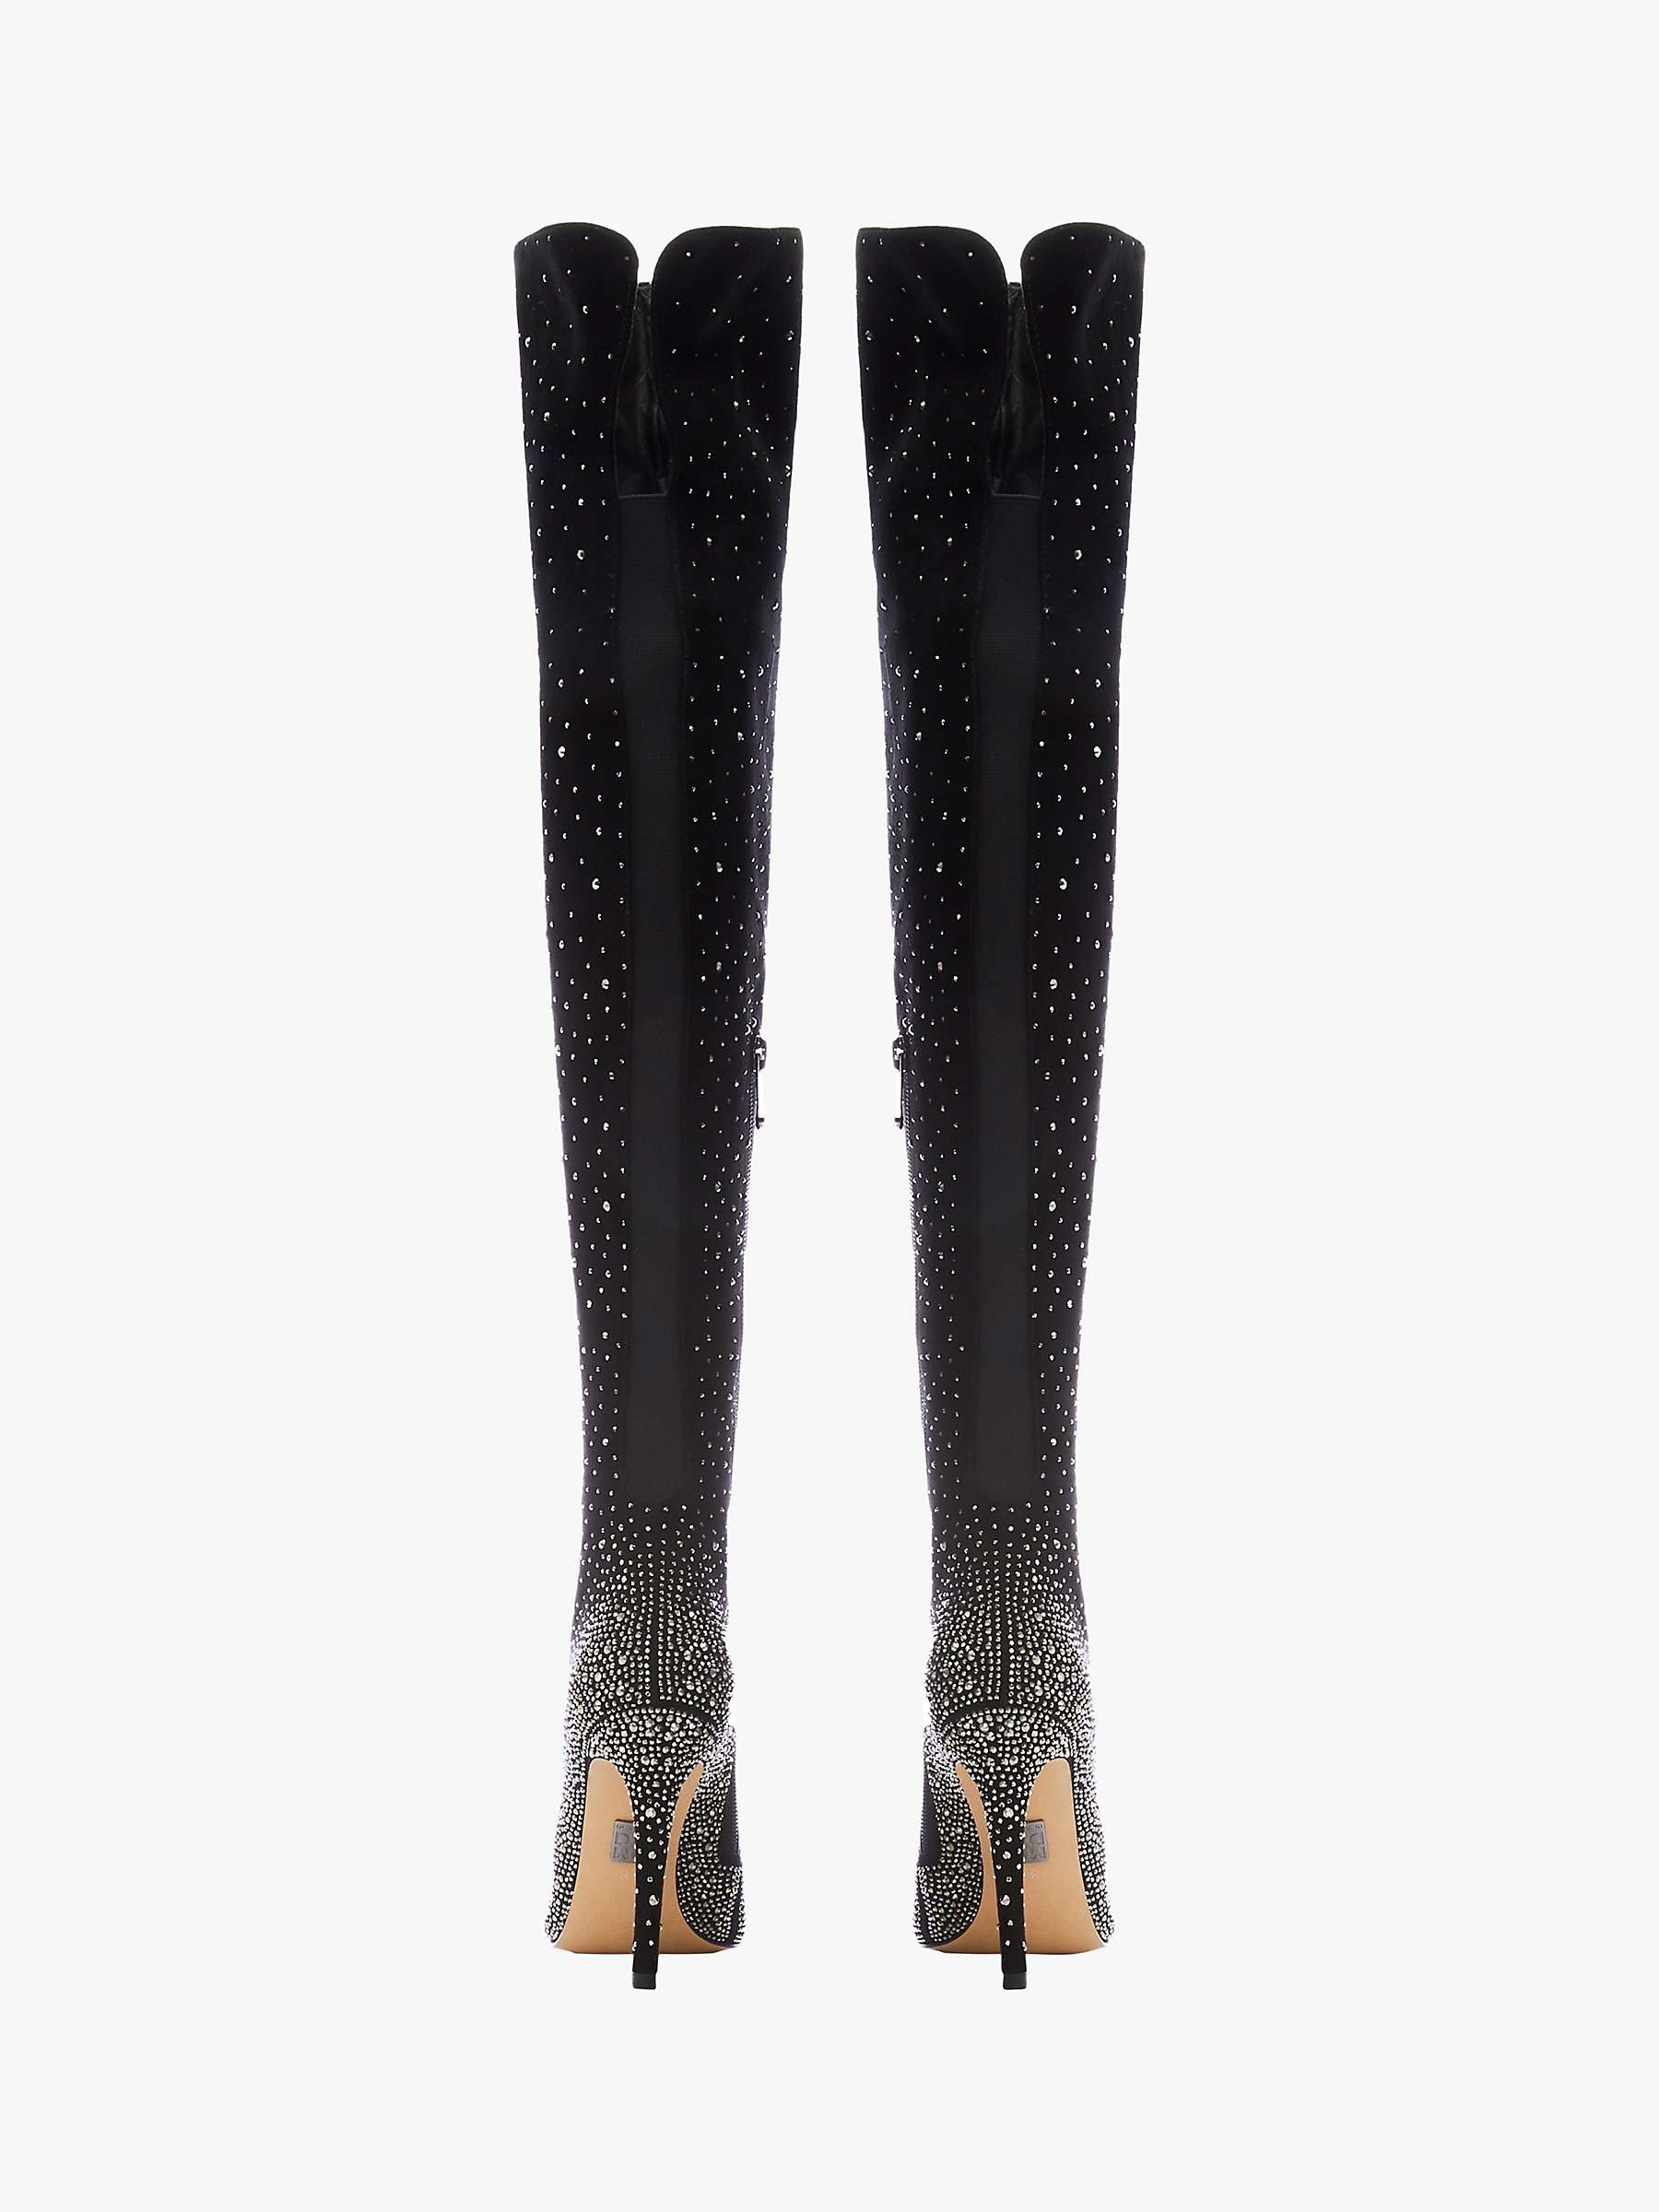 Buy Moda in Pelle Yesenia Suede Diamante Embellished Over The Knee Boots, Black Online at johnlewis.com